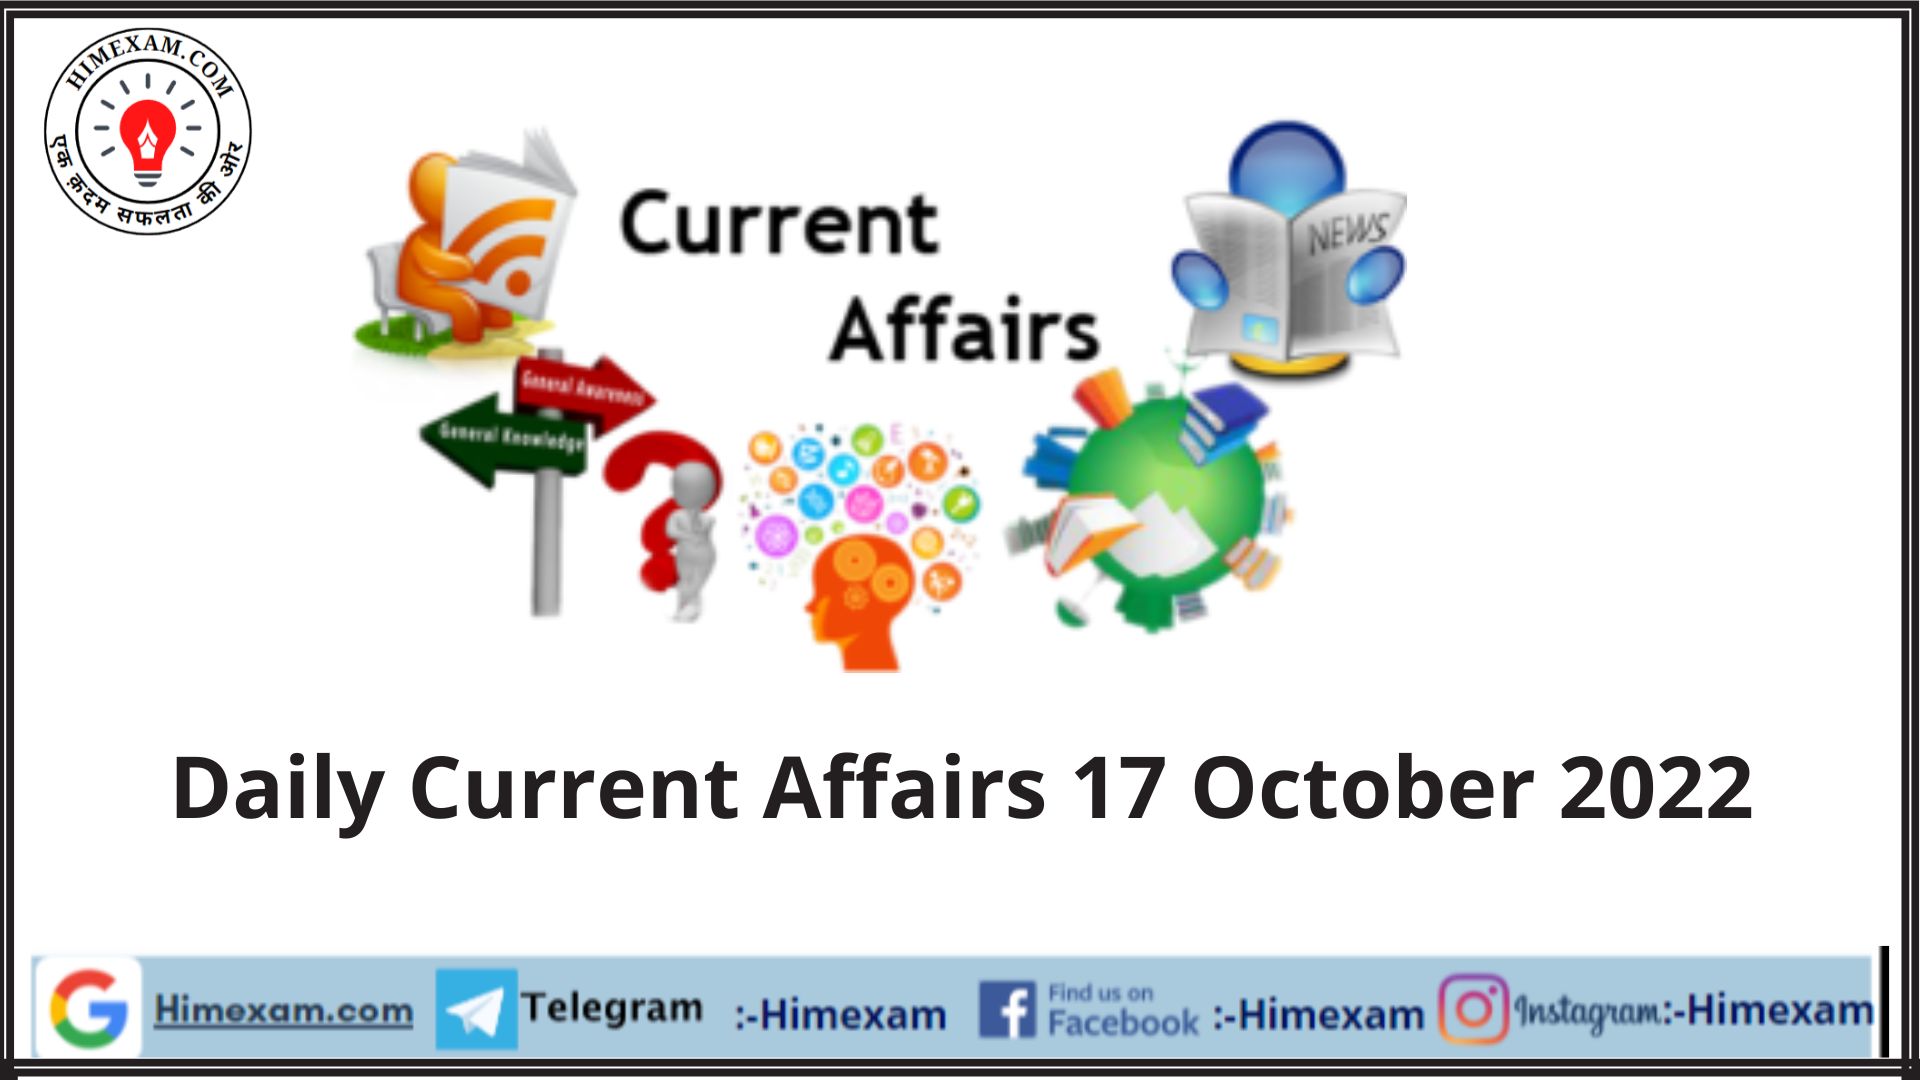 Daily Current Affairs 17 October 2022